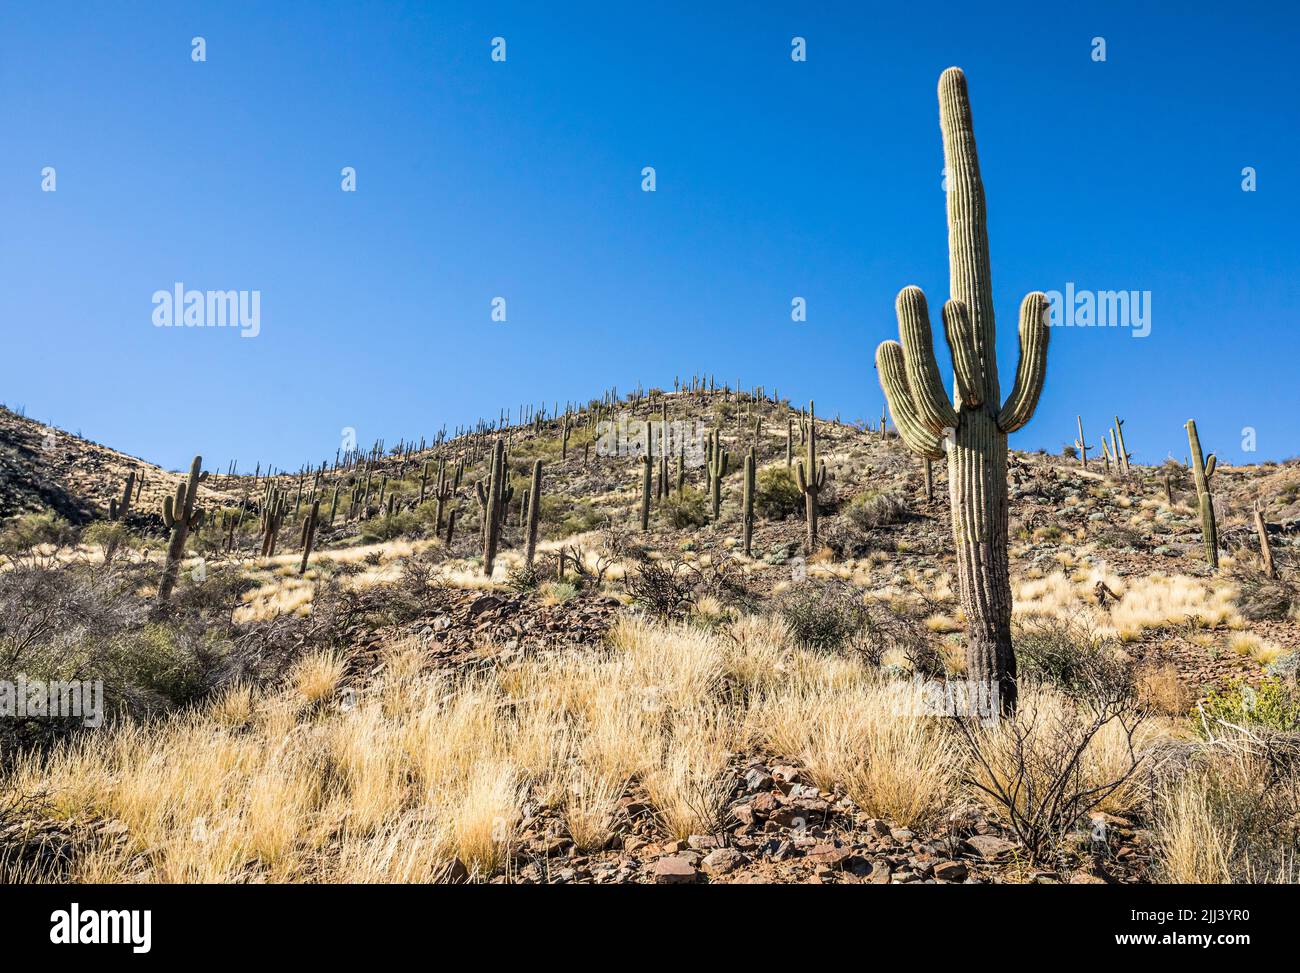 A hillside of Saguaro cactus and other desert plants along the Go John trail in Cave Creek Regional Park, Arizona. Stock Photo